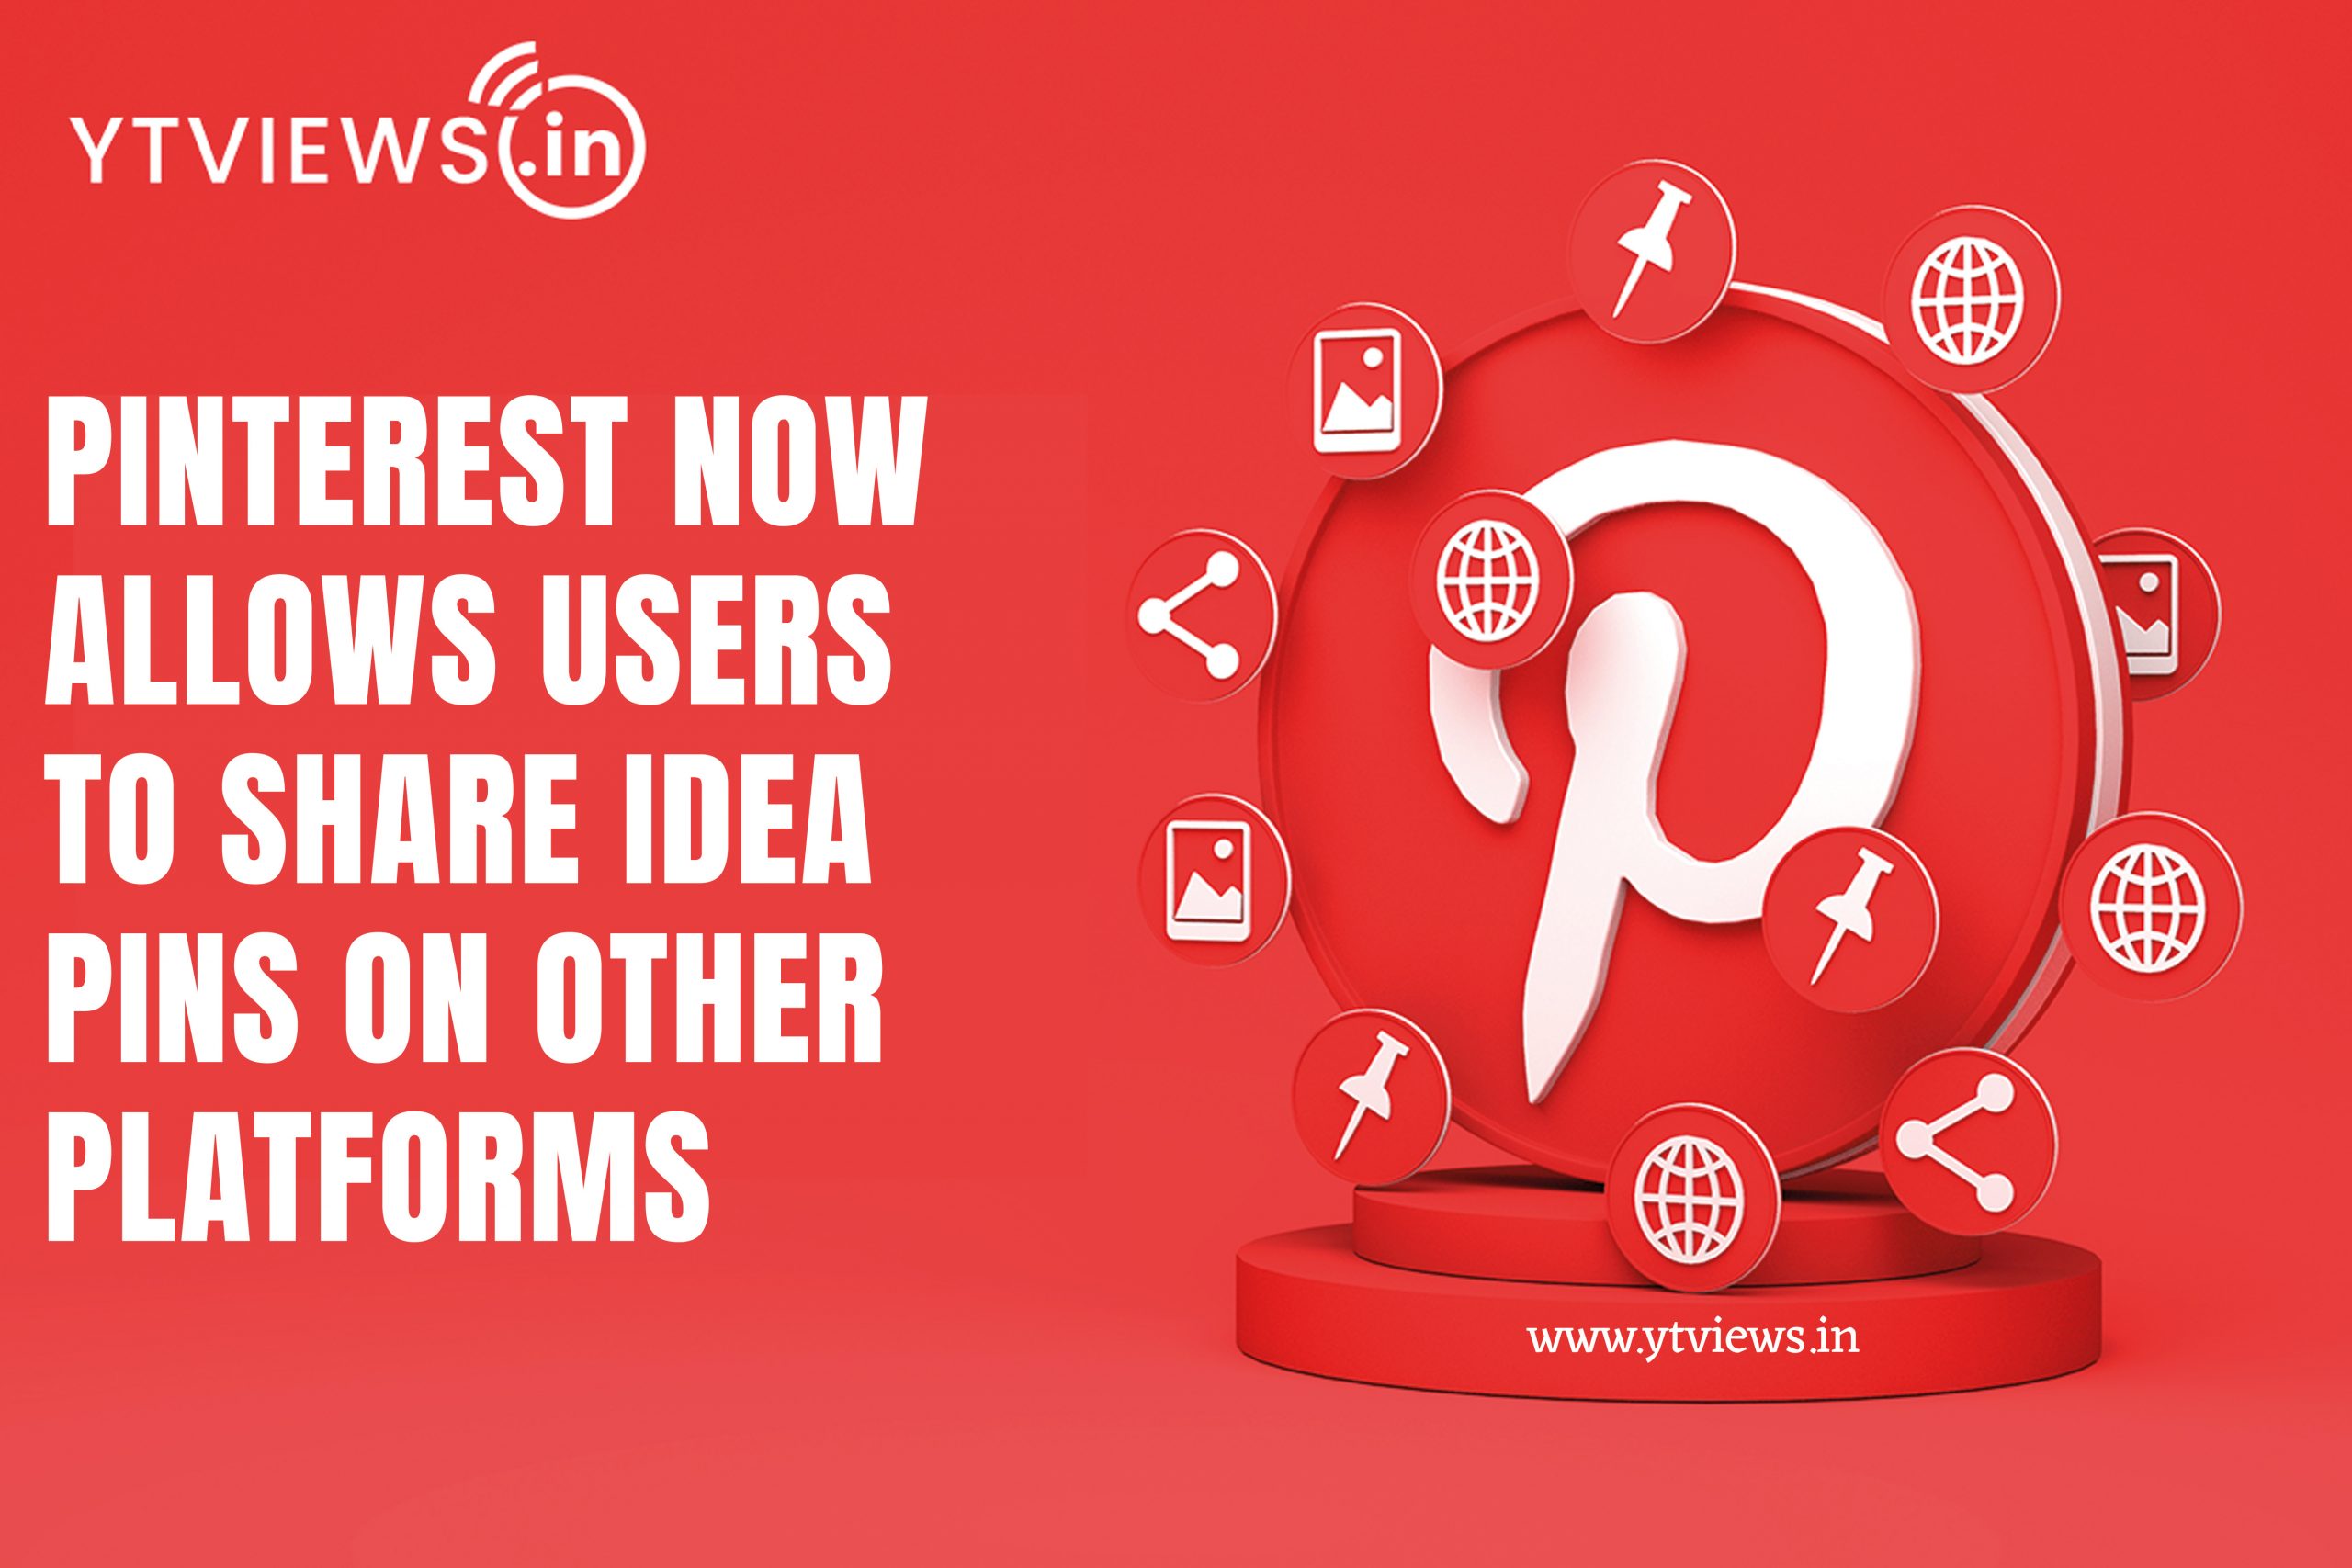 Pinterest now allows users to share idea pins on other platforms